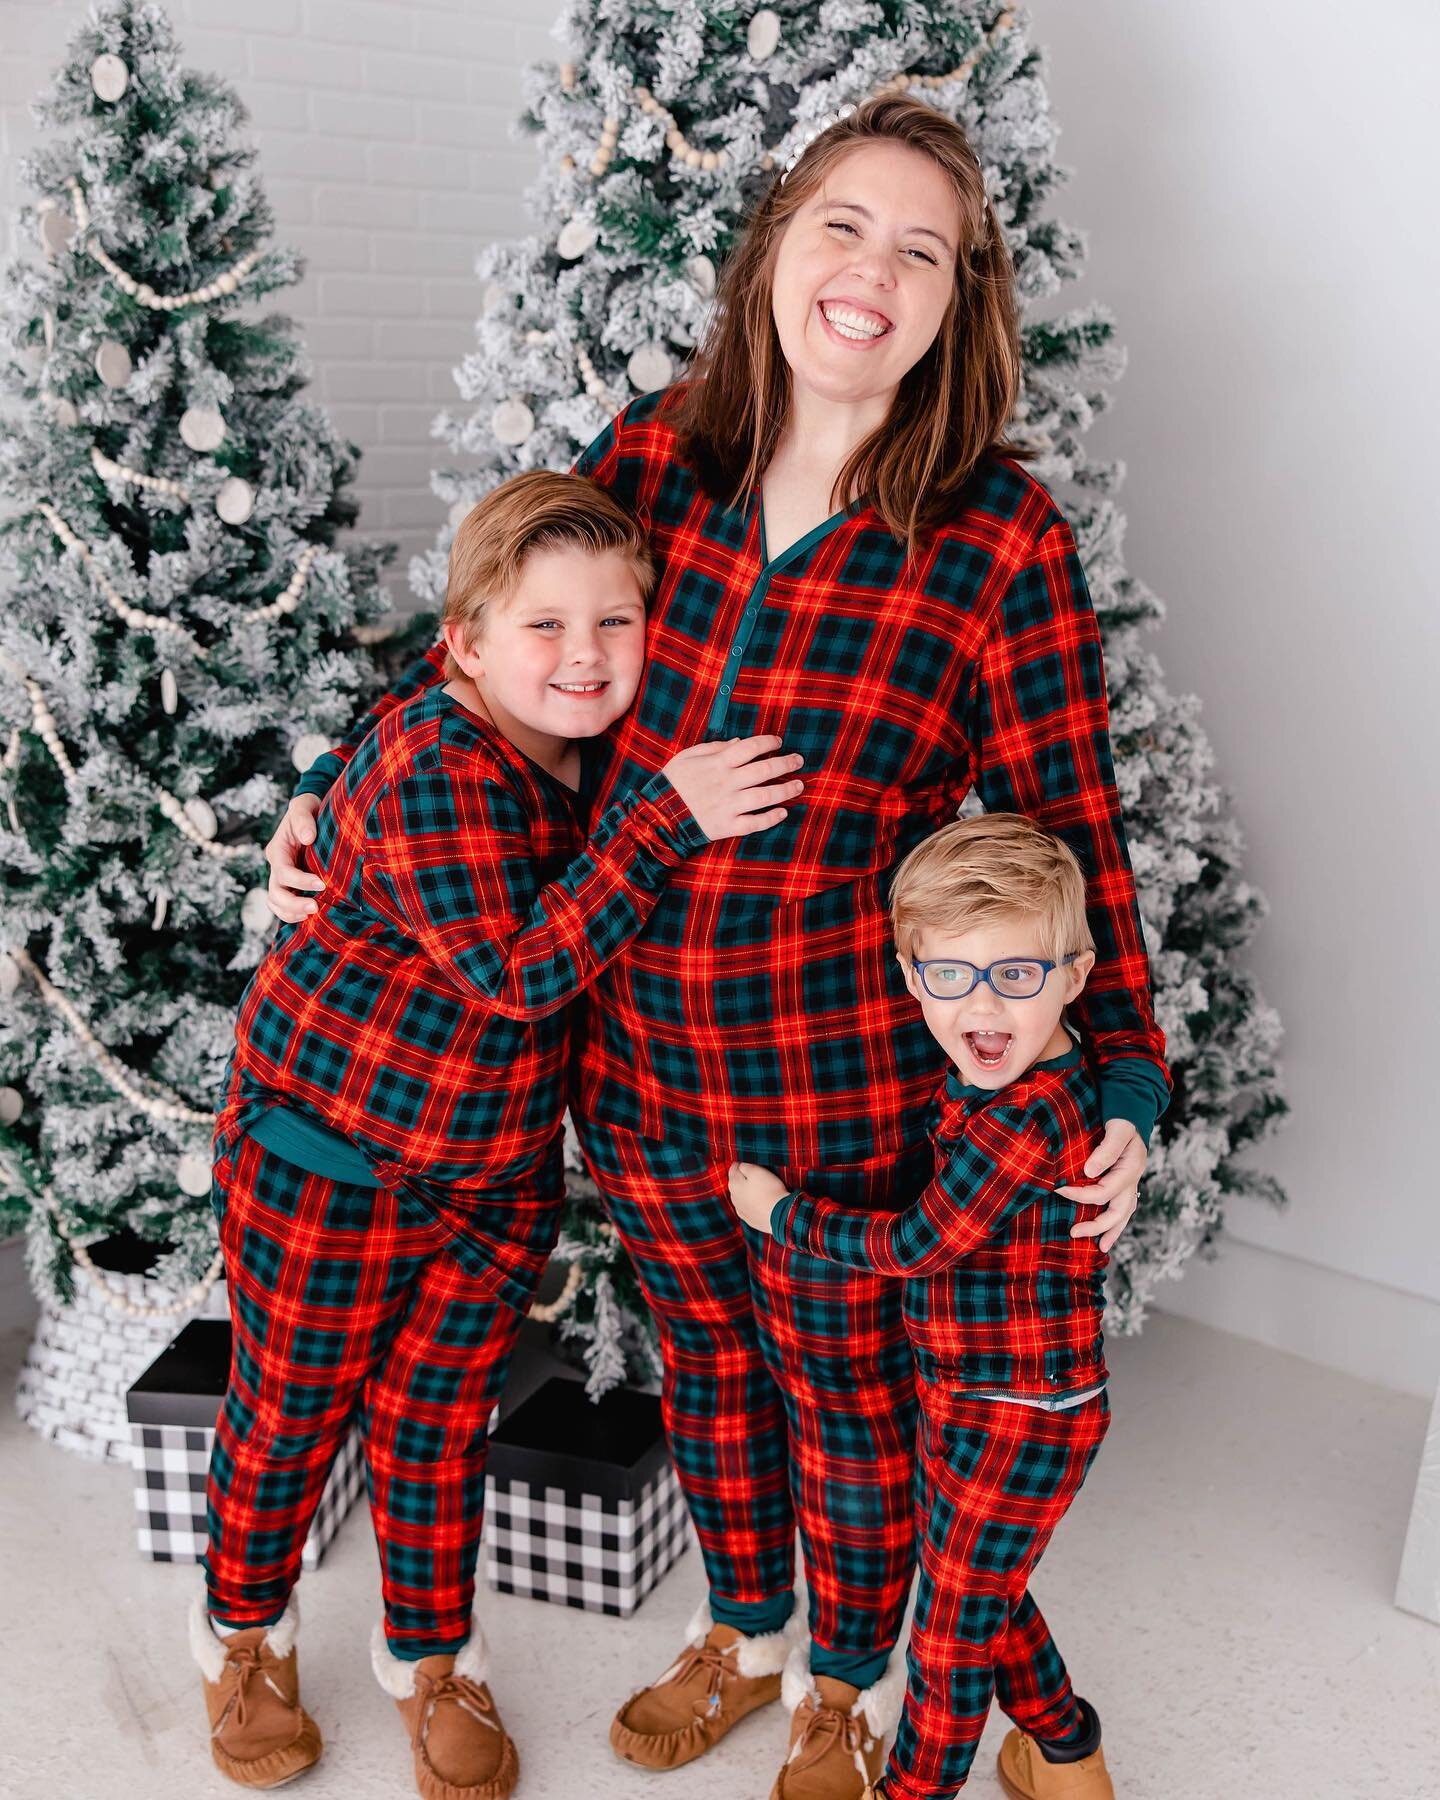 Merry Christmas!!!
&bull;
Loved photographing my friend and her two (soon be 3!!!) little cutie pies in their Christmas jammies. 🥰&hearts;️

I hope everyone has a cozy, peaceful, and happy day!